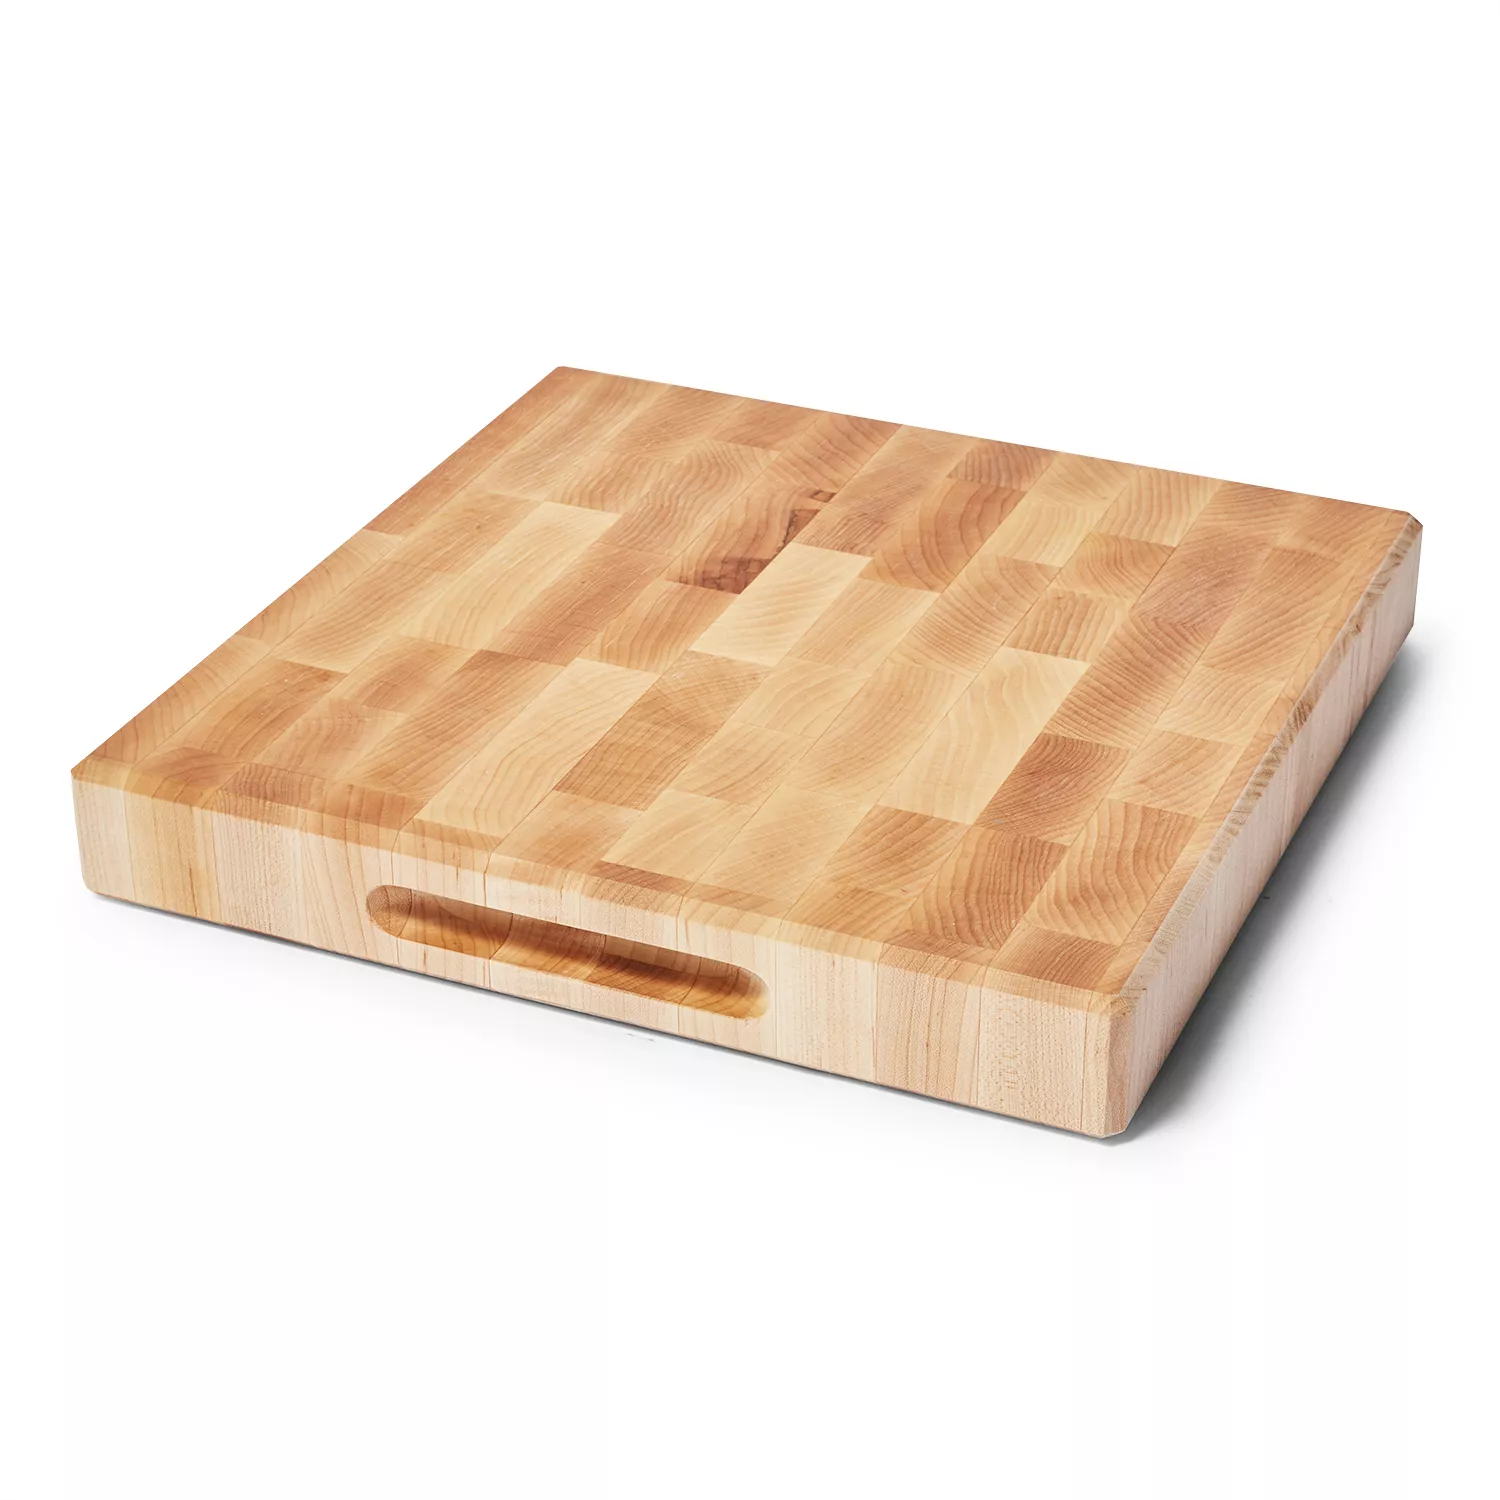 ZWILLING Cherry Wood Carving Board with Handles 